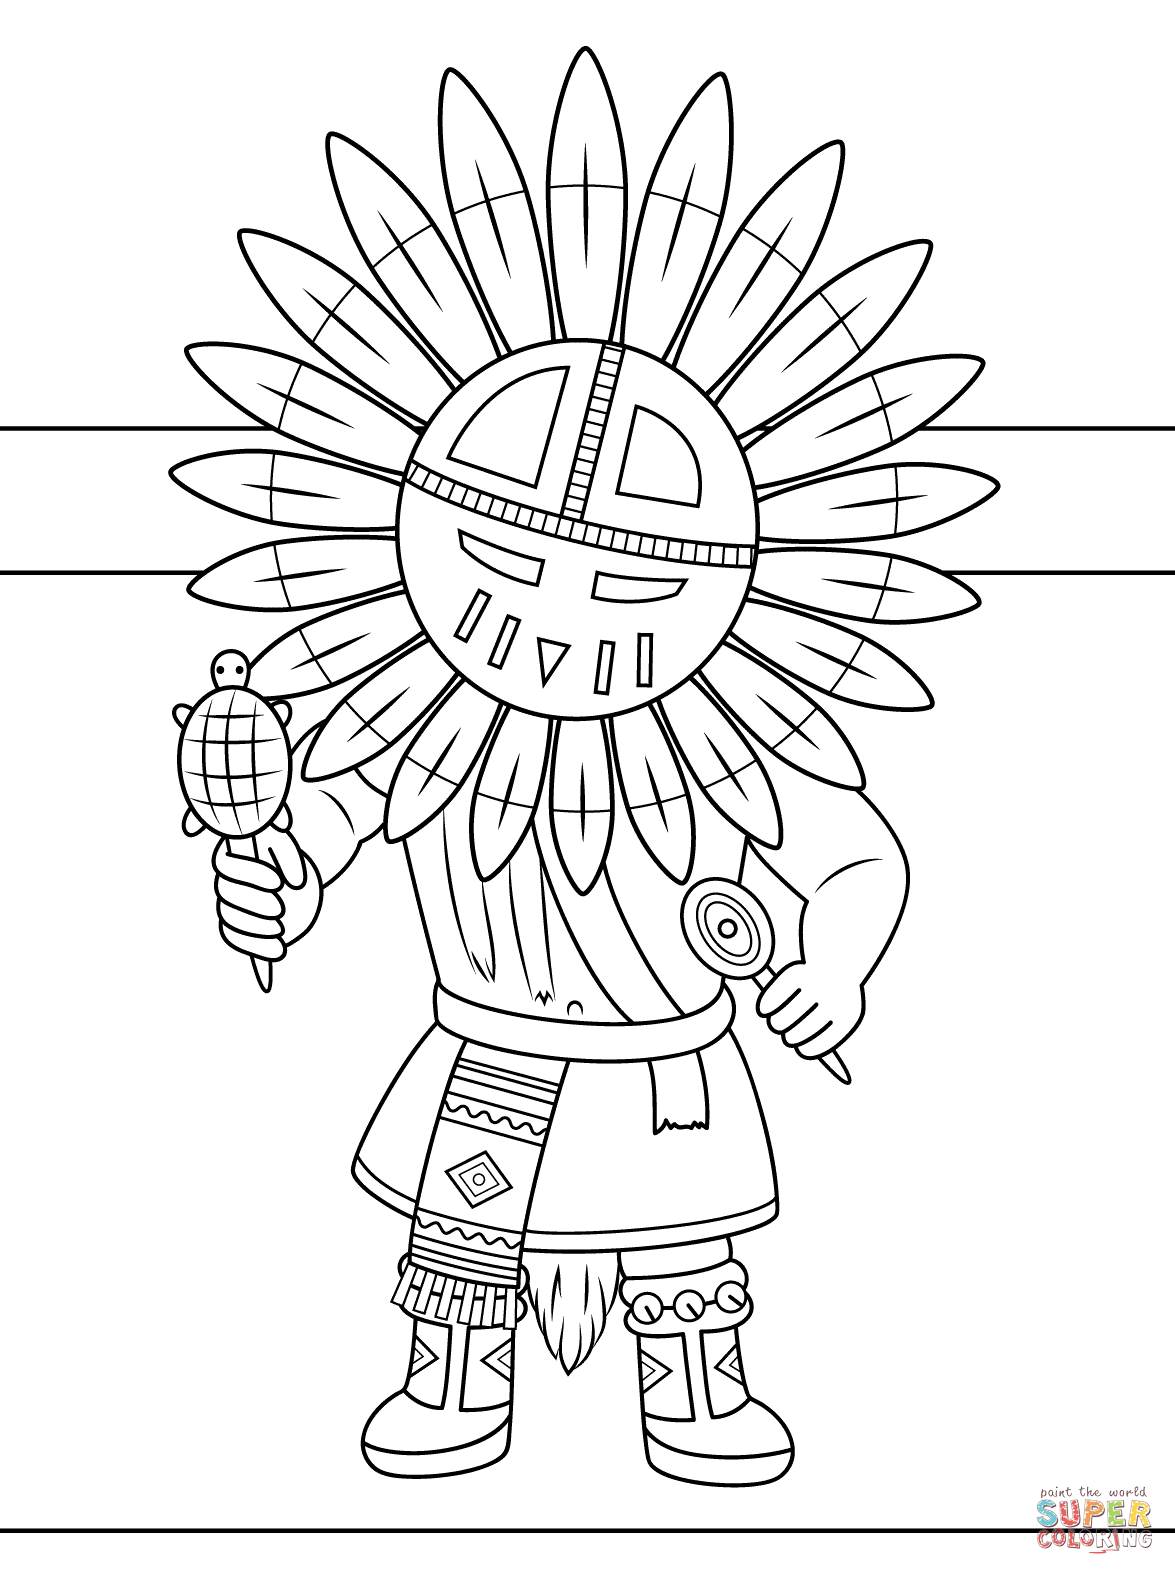 Kachina doll coloring page free printable coloring pages